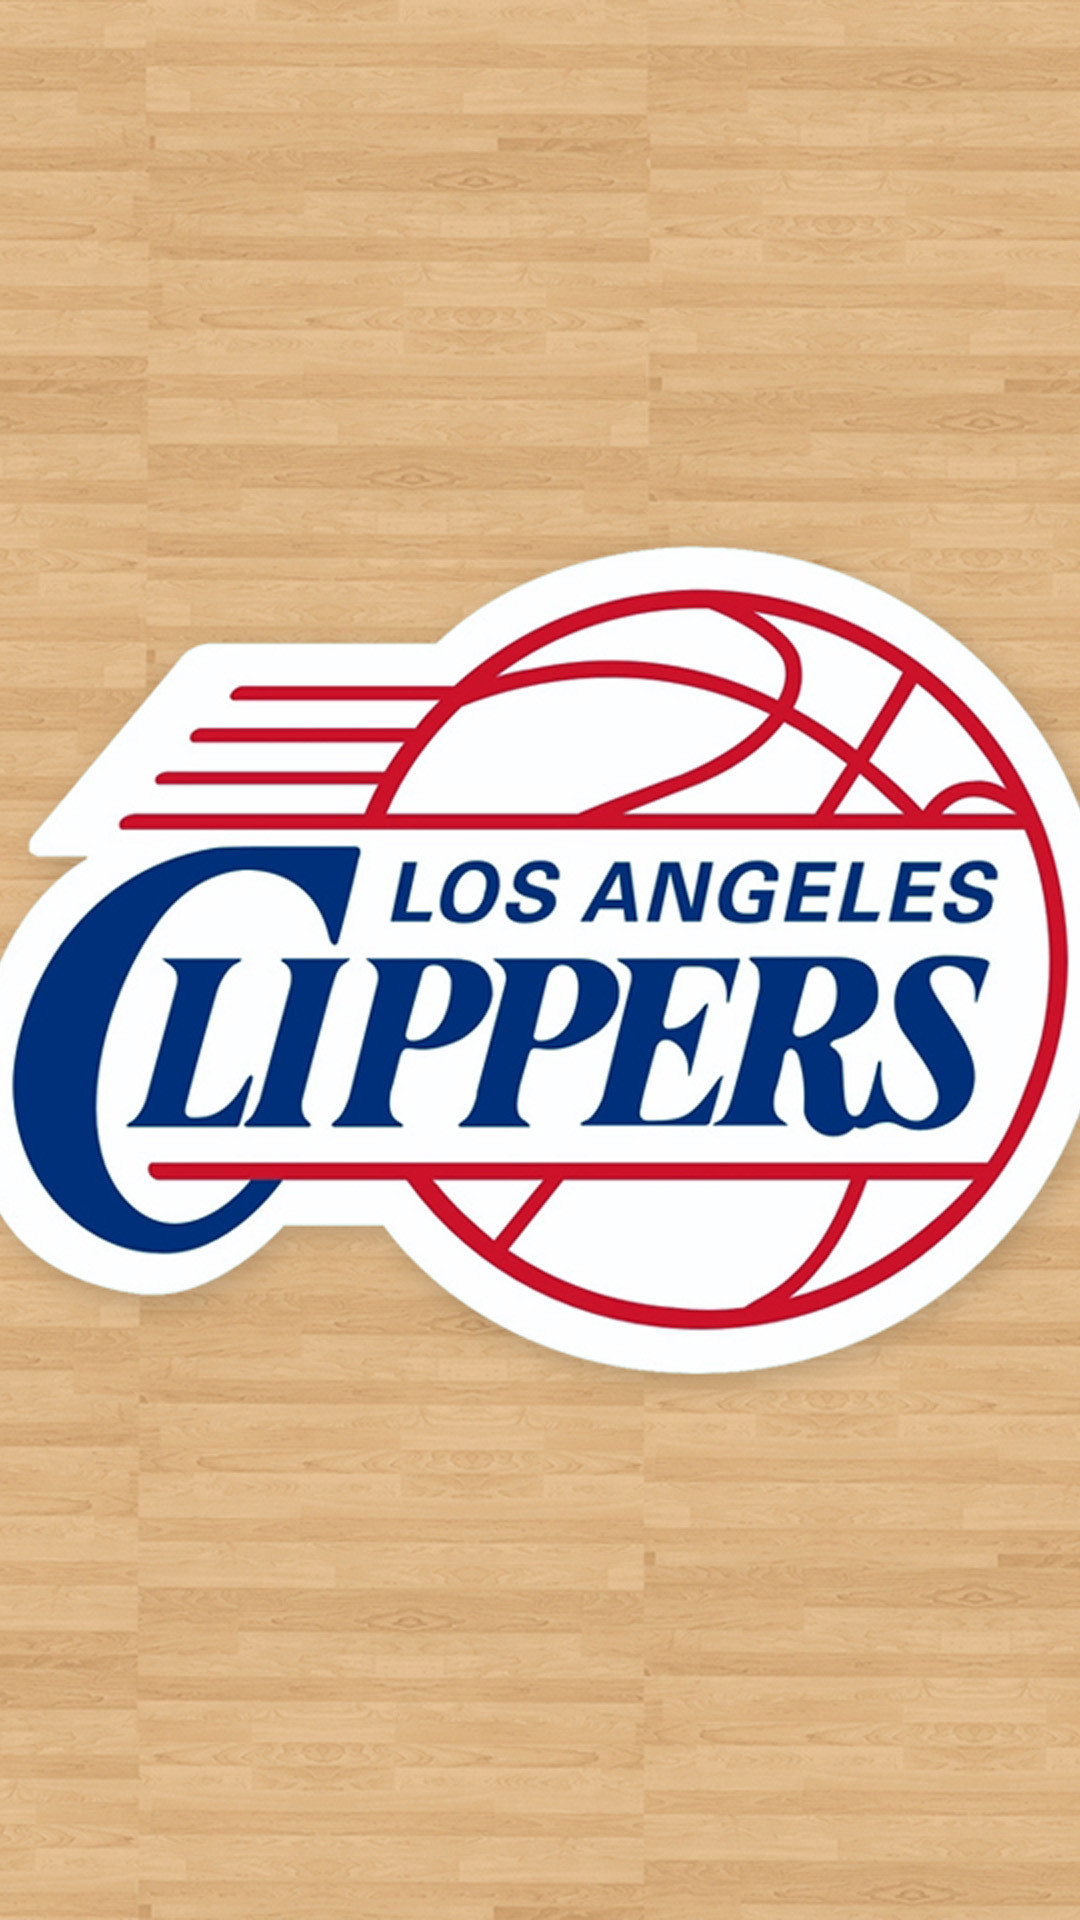 Download wallpapers Los Angeles Clippers American basketball team blue  red stone background Los Angeles Clippers logo grunge art NBA  basketball USA Los Angeles Clippers emblem for desktop with resolution  2880x1800 High Quality